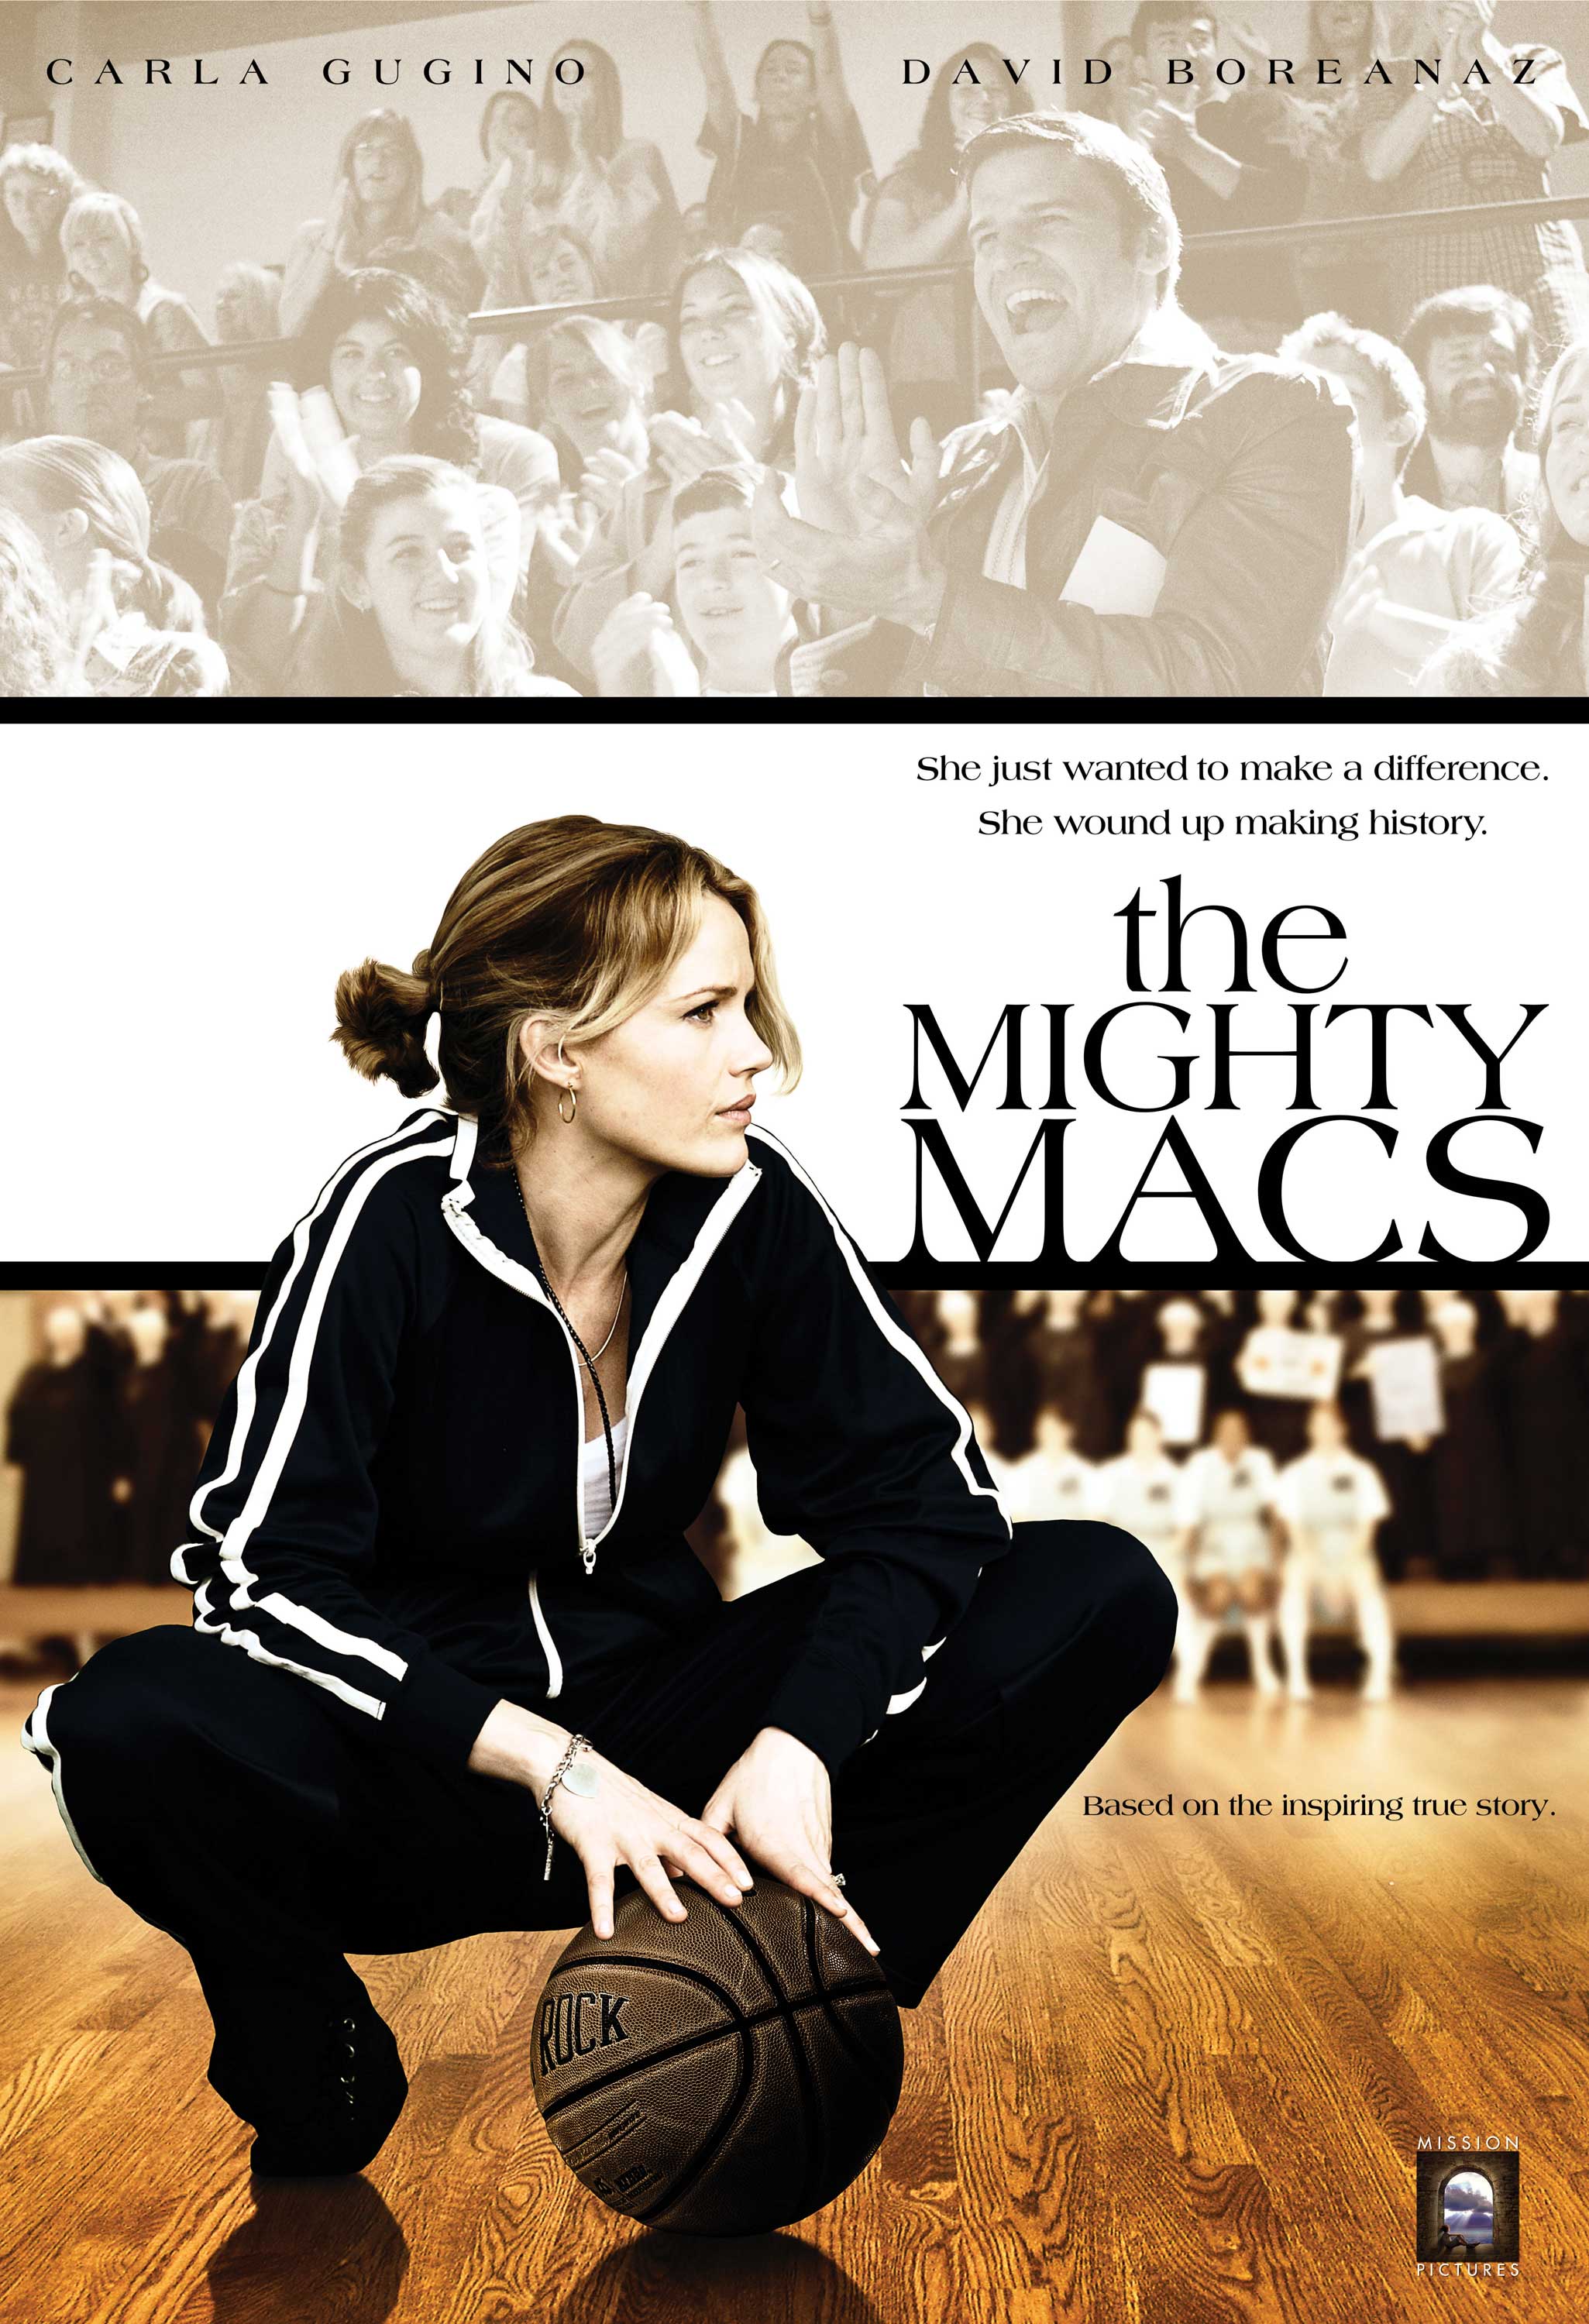 The Mighty Macs - Mission Pictures